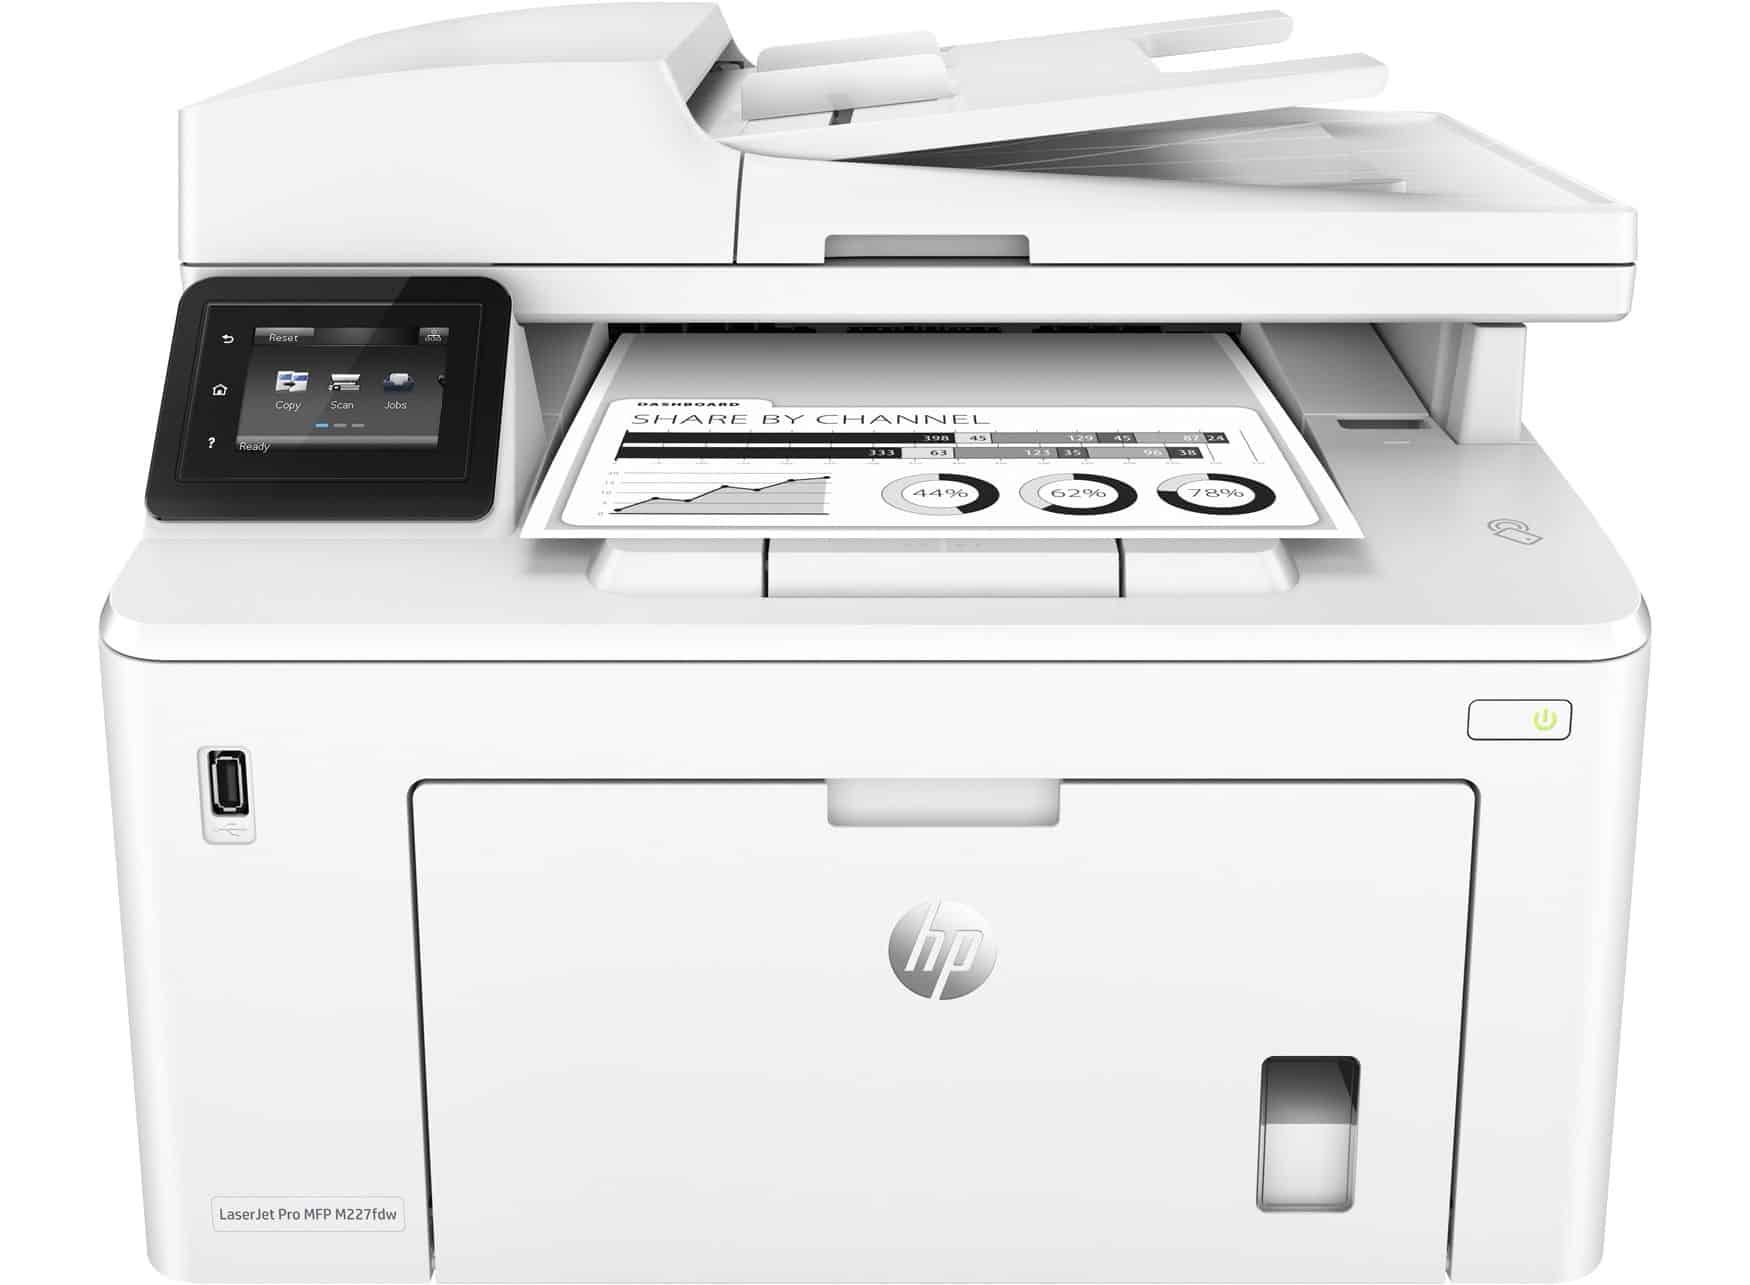 Mfp M227Fdw Driver / HP LaserJet Pro MFP M227sdn(G3Q74A)| HP® India / Hp laserjet pro mfp m227fdw users tend to choose to install the driver by using cd or dvd driver because it is easy and faster to do.